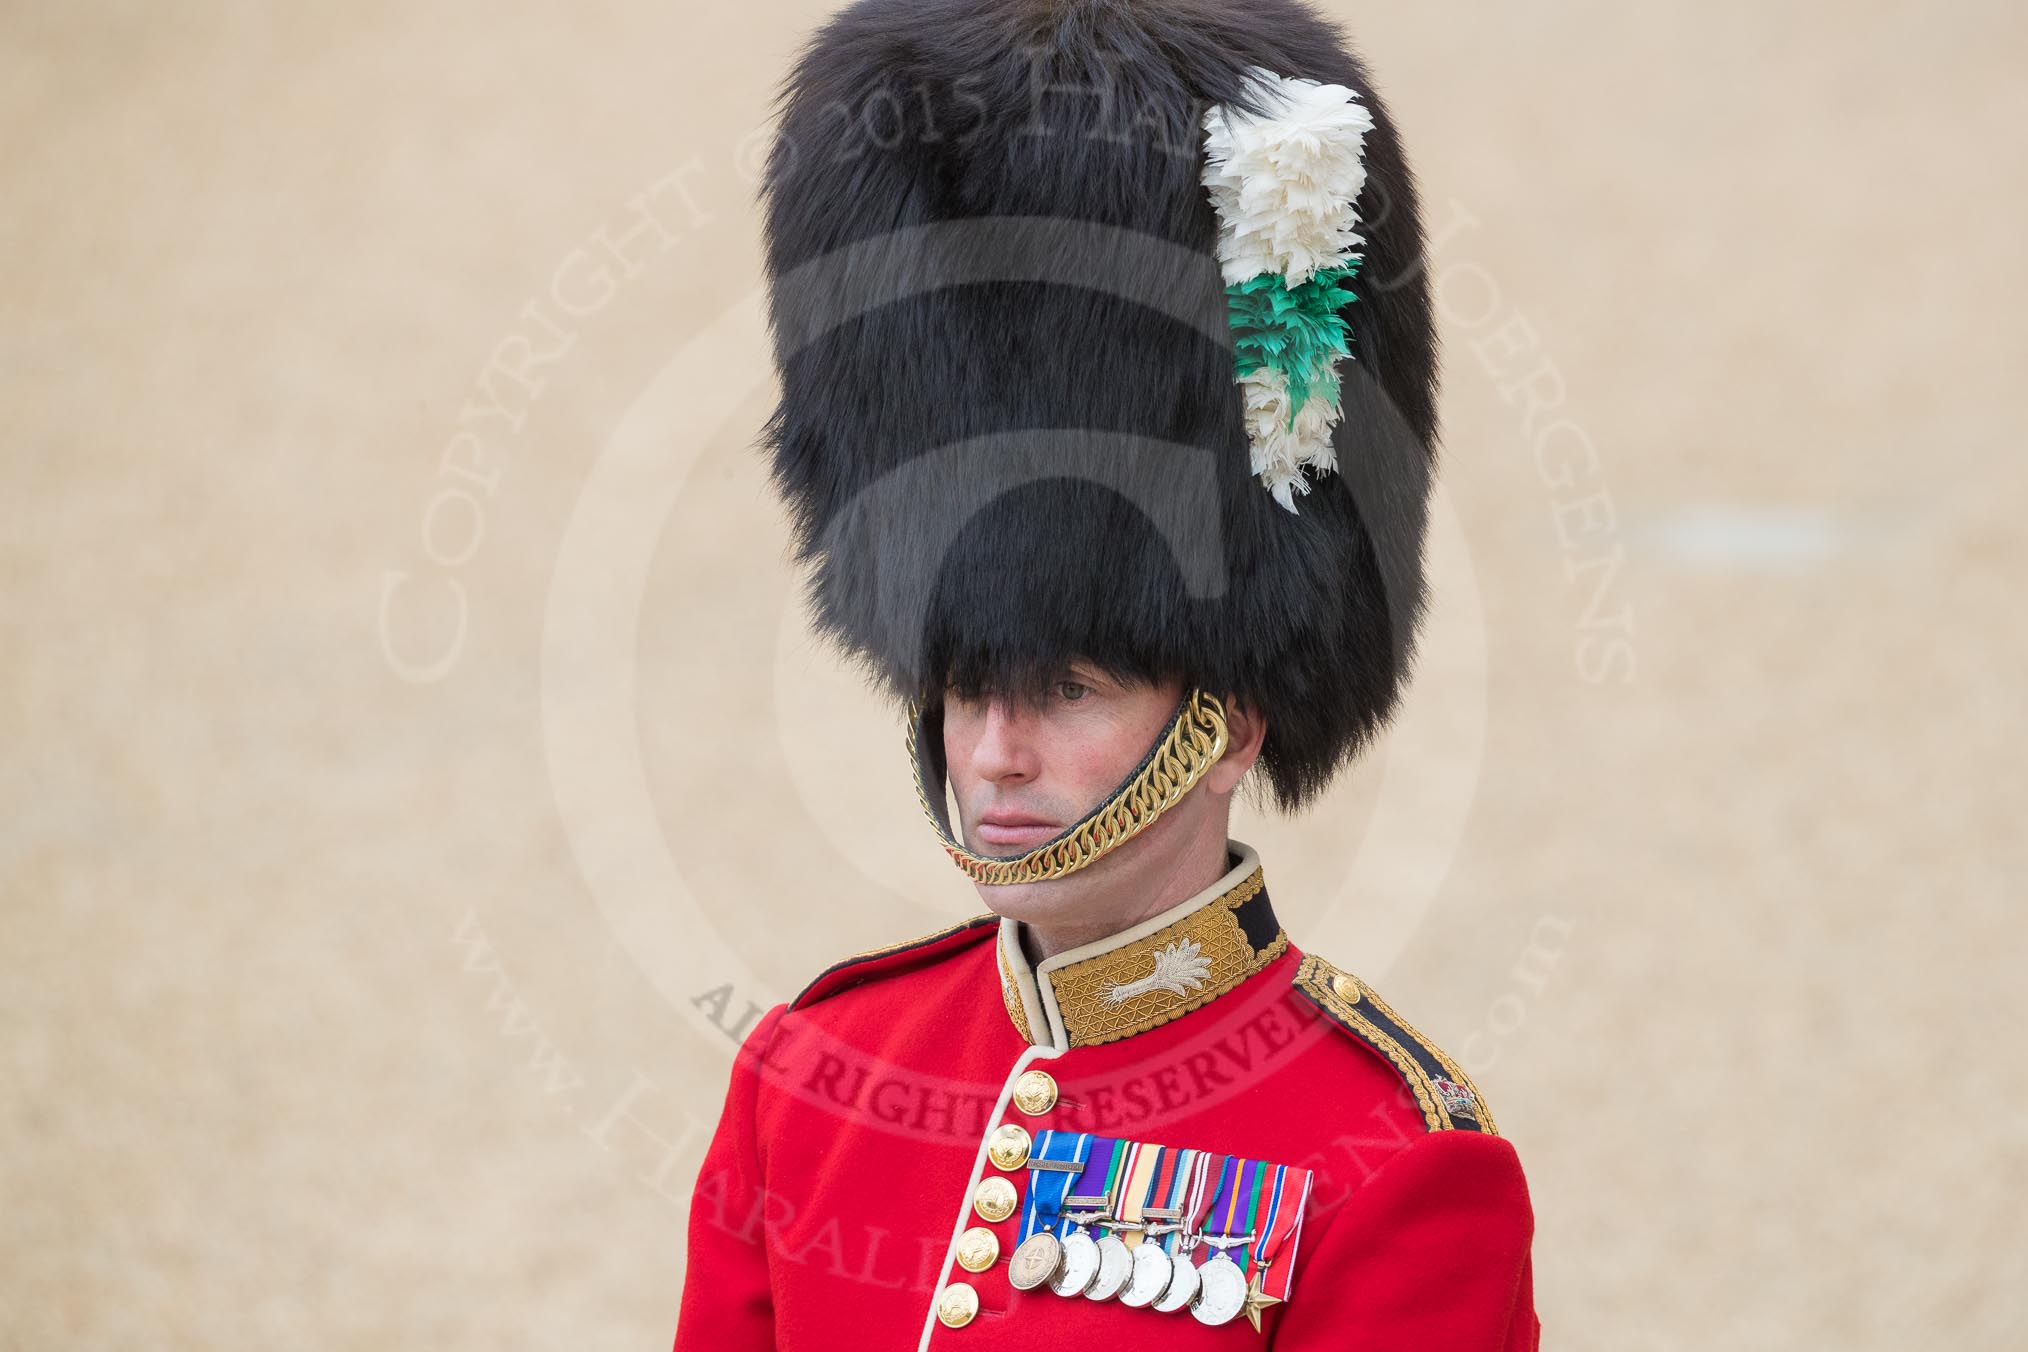 Trooping the Colour 2016.
Horse Guards Parade, Westminster,
London SW1A,
London,
United Kingdom,
on 11 June 2016 at 09:17, image #8